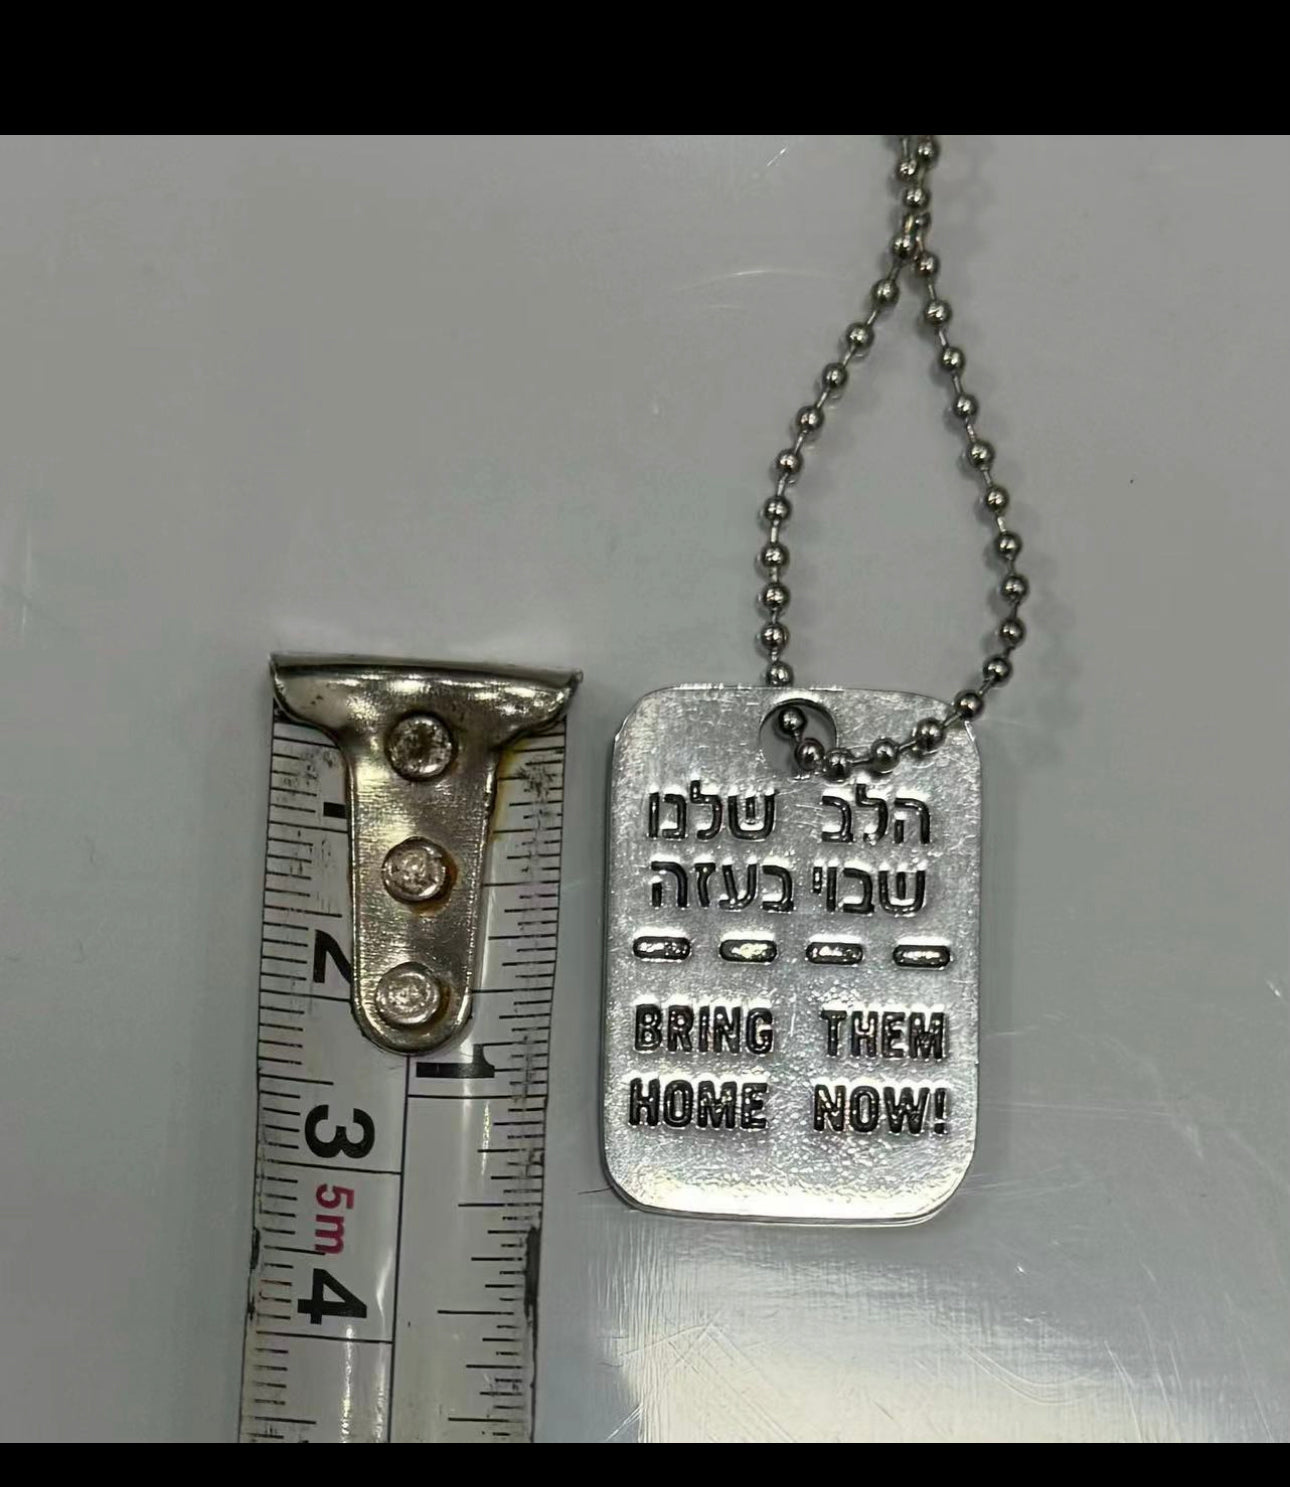 Bring Them Home Now Two Sides Tag Necklace Jewelry Women Men Unisex Chain  show Support of Israel  Israel Dog Tag hand made in Israel  Small size